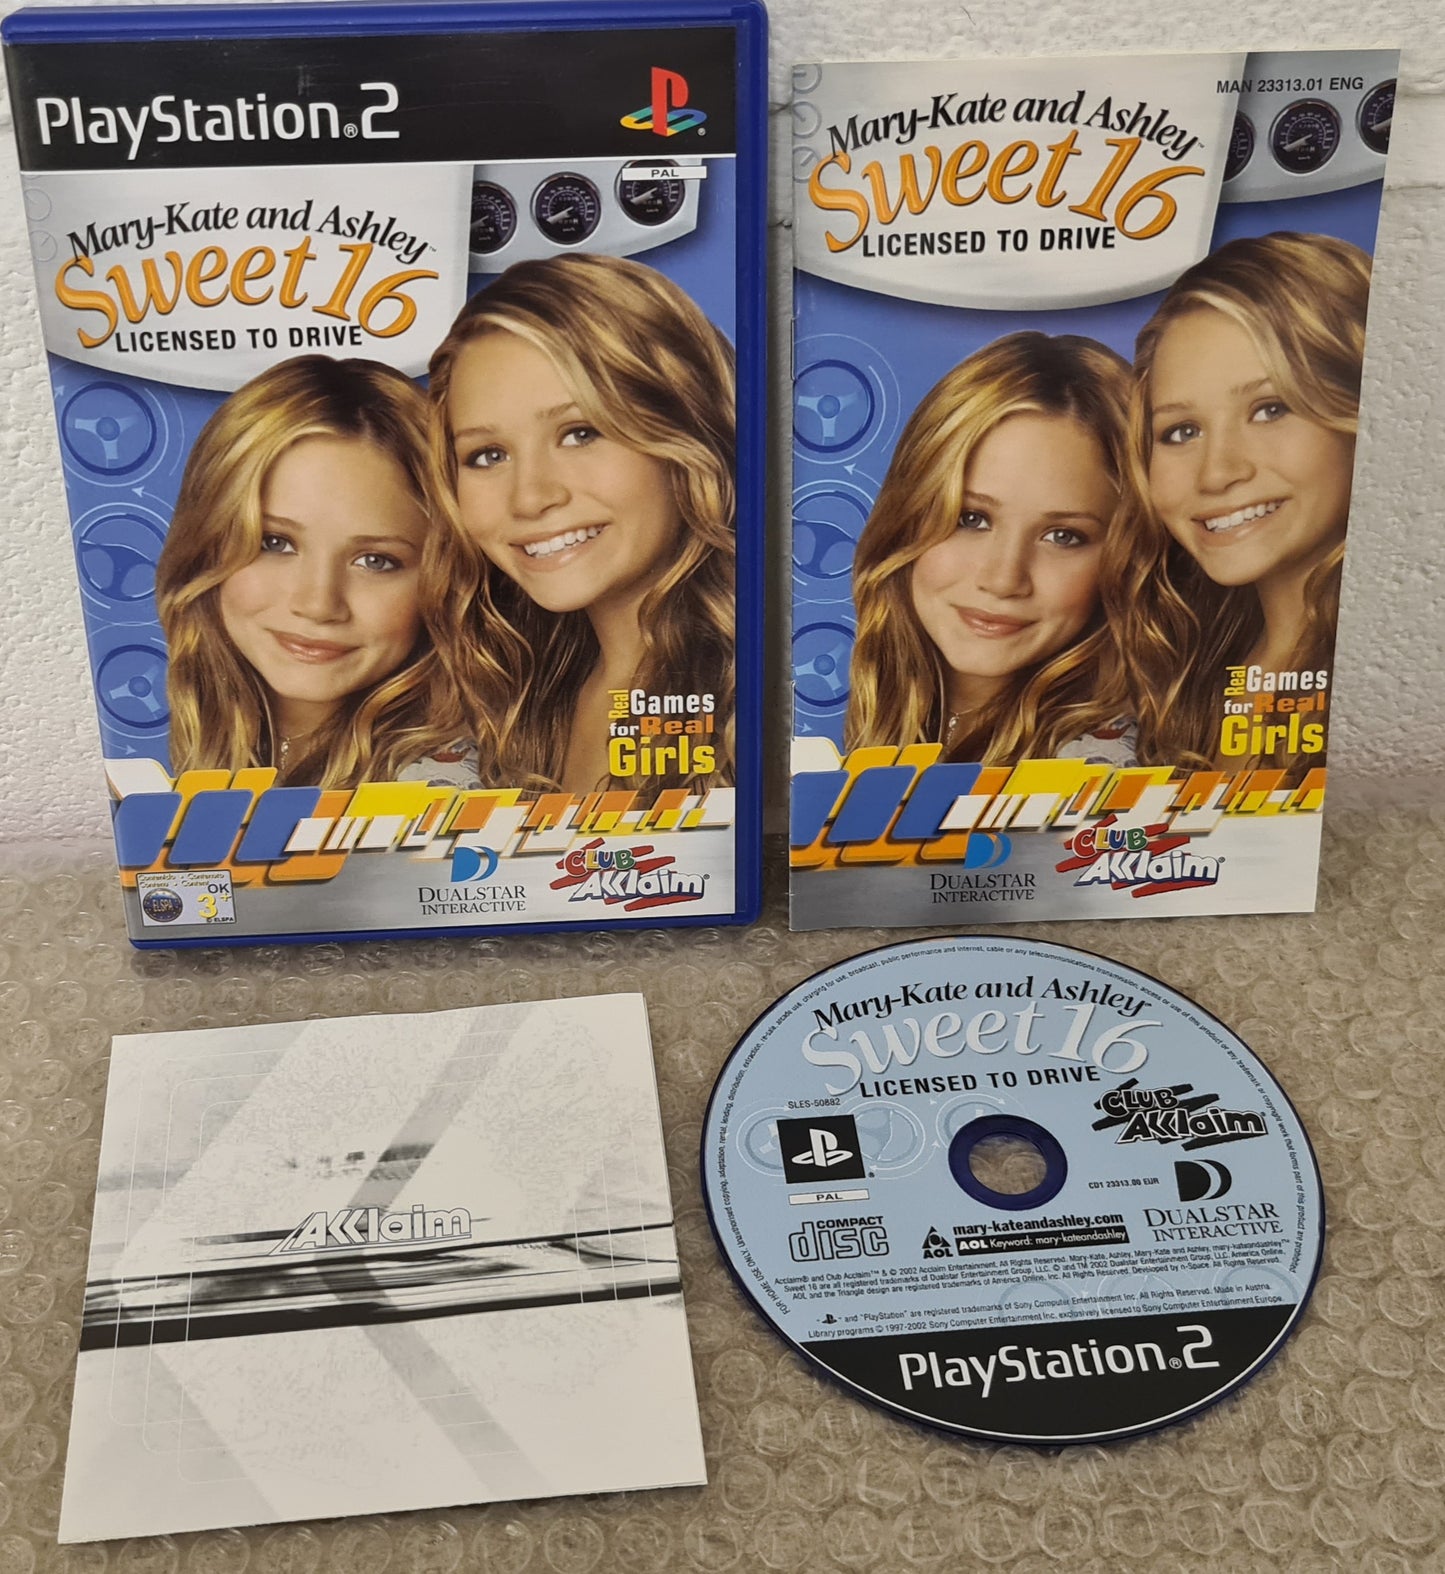 Mary-Kate and Ashley Sweet 16 Licensed to Drive Sony Playstation 2 (PS2) Game